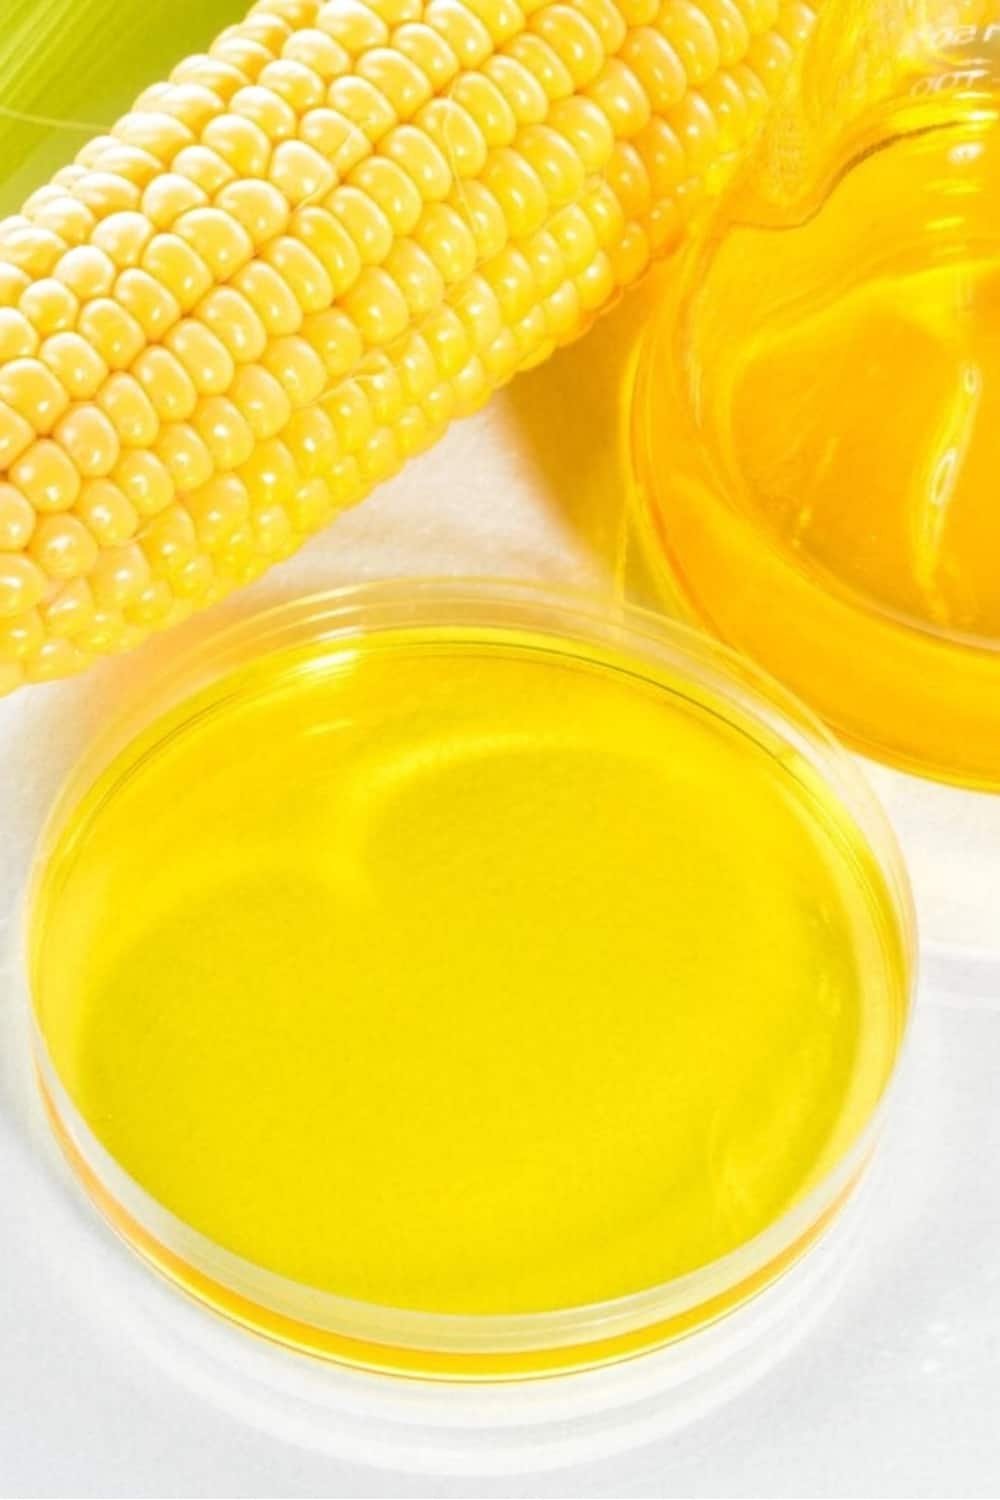 corn and a bowl of syrup in a bowl